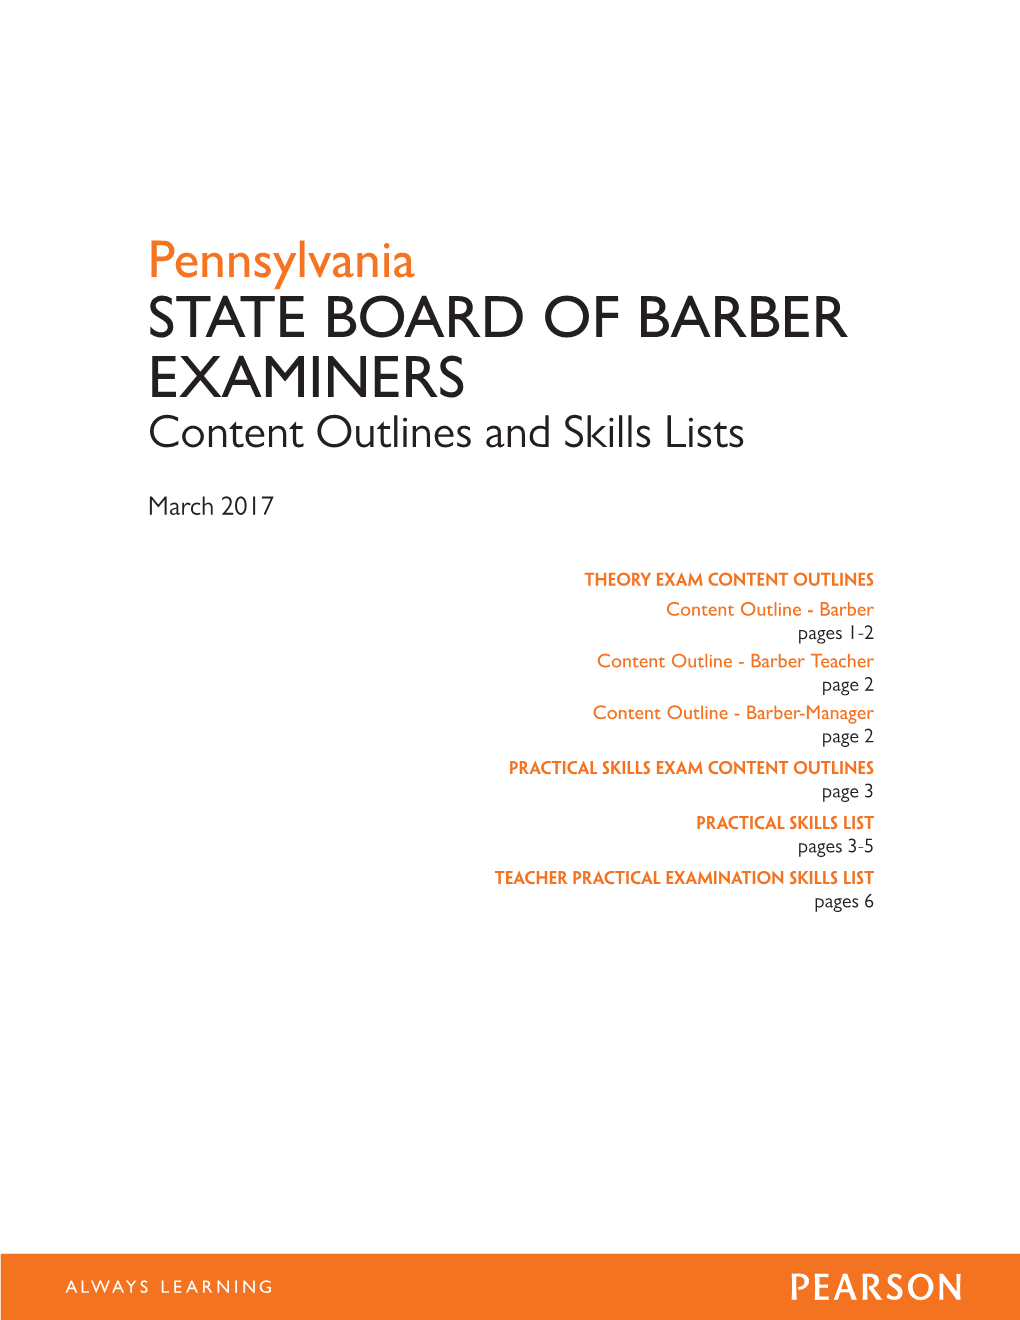 STATE BOARD of BARBER EXAMINERS Content Outlines and Skills Lists